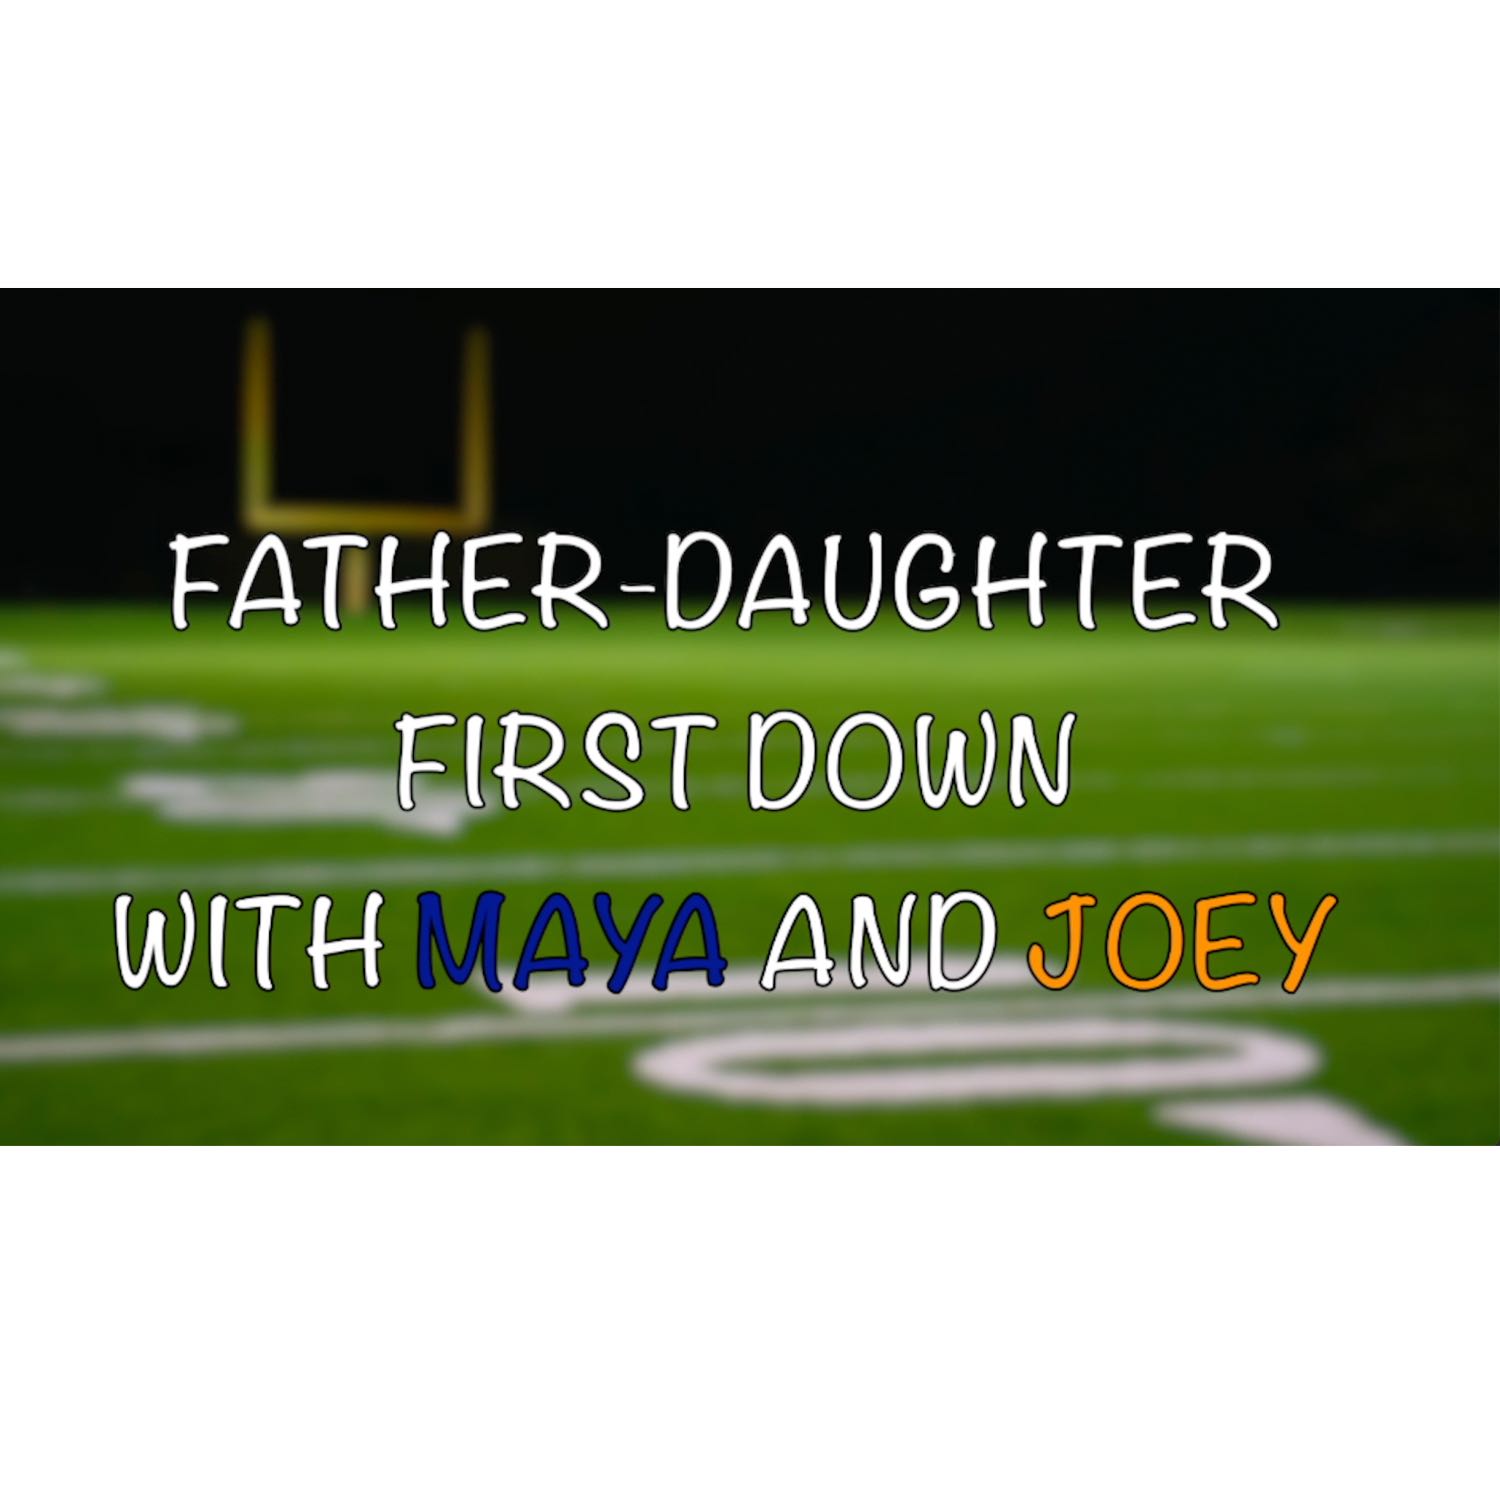 Father-Daughter First Down with Maya and Joey